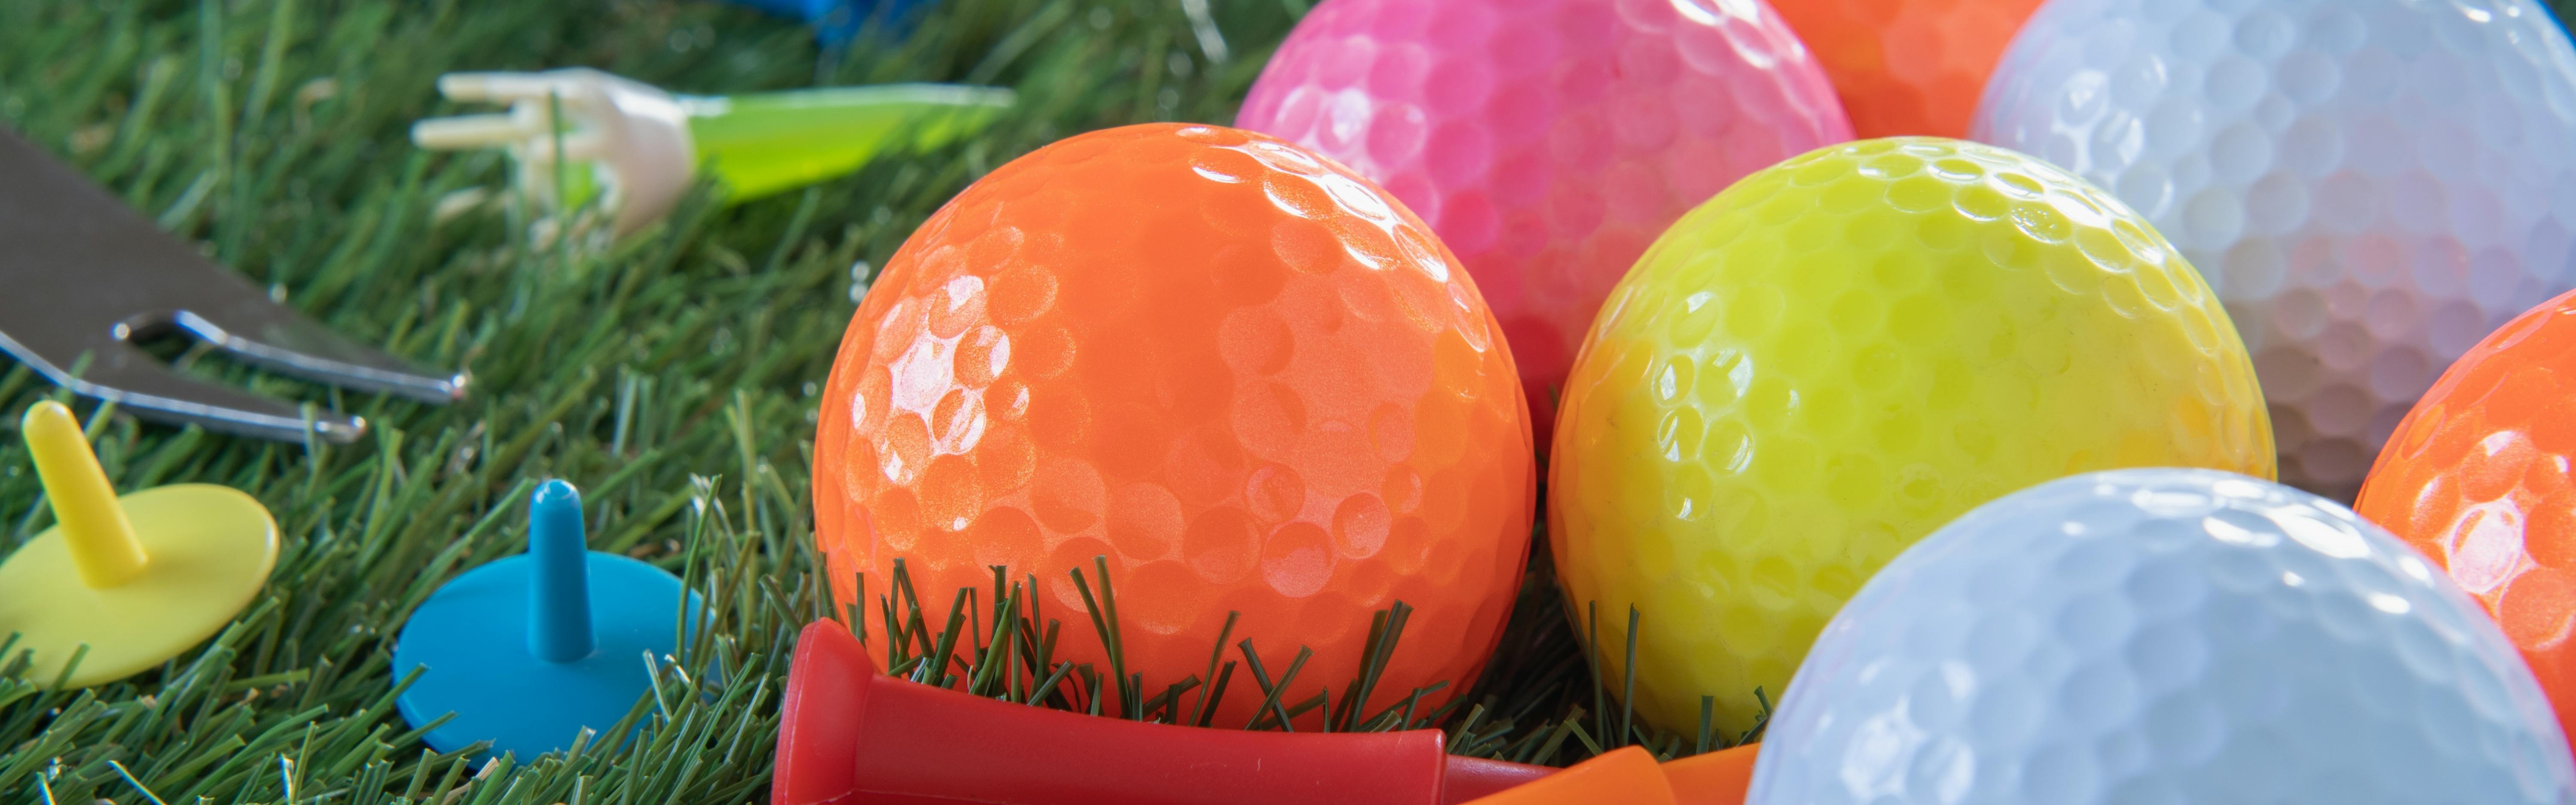 Golf Ball Selection 101: How to Choose the Right Ball for Your Playing  Style